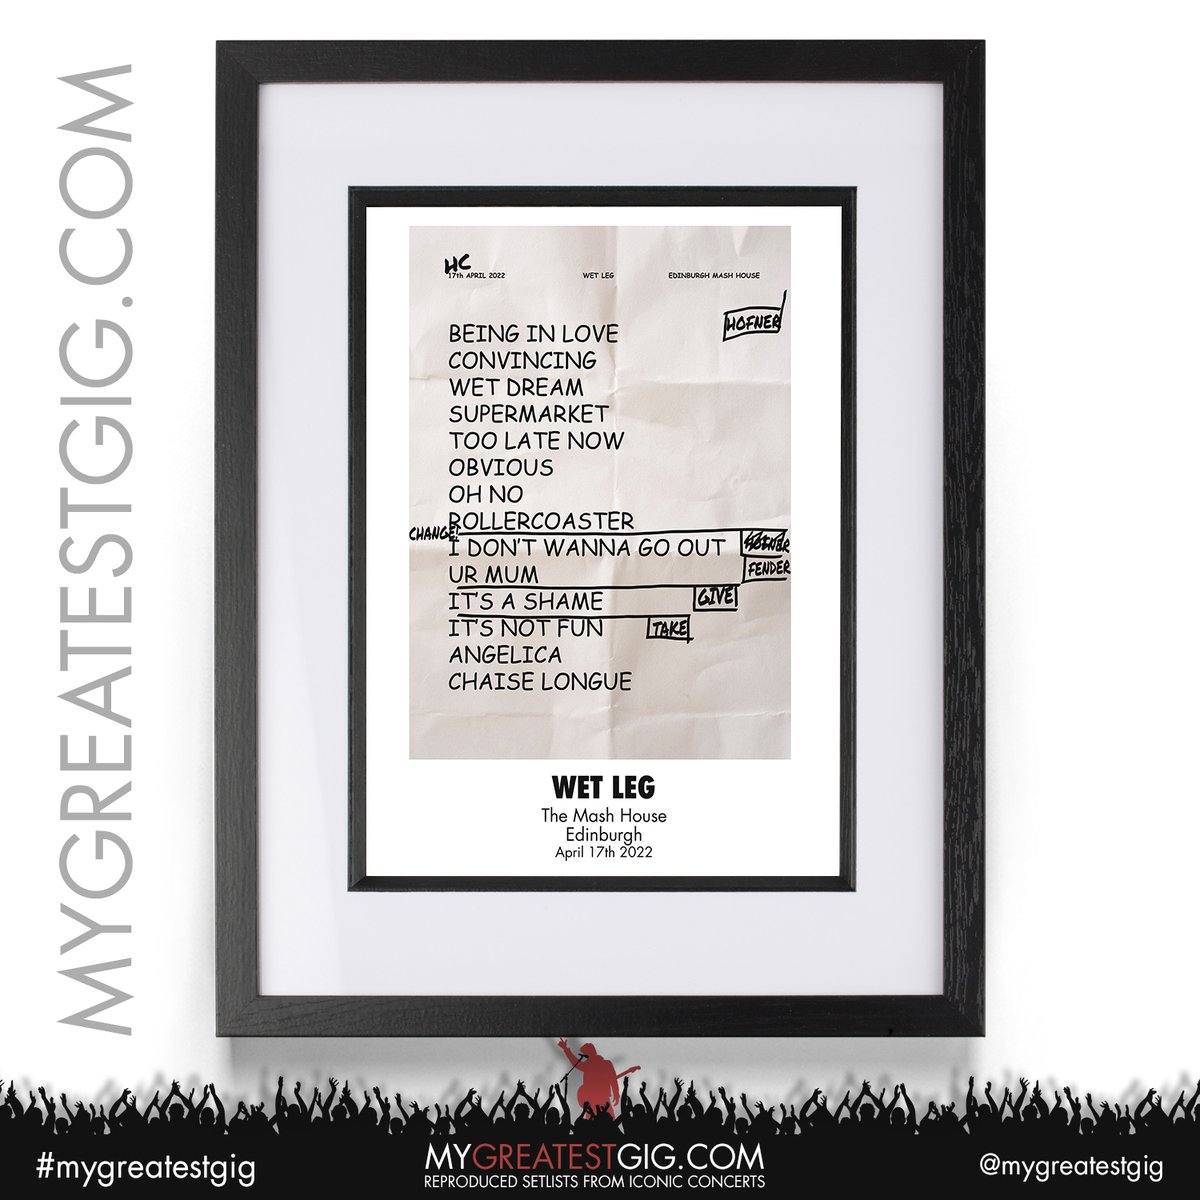 On This Day 2 Years ago (17/04/2022) Wet Leg played Edinburgh Mash House
...and we’ve made a replica of the setlist

Message us with any requests.

#mygreatestgig #setlist #replicasetlist #setlistposter #greatestgig #livemusic #gigsetlist #thehomeofreplicasetlists #wetleg